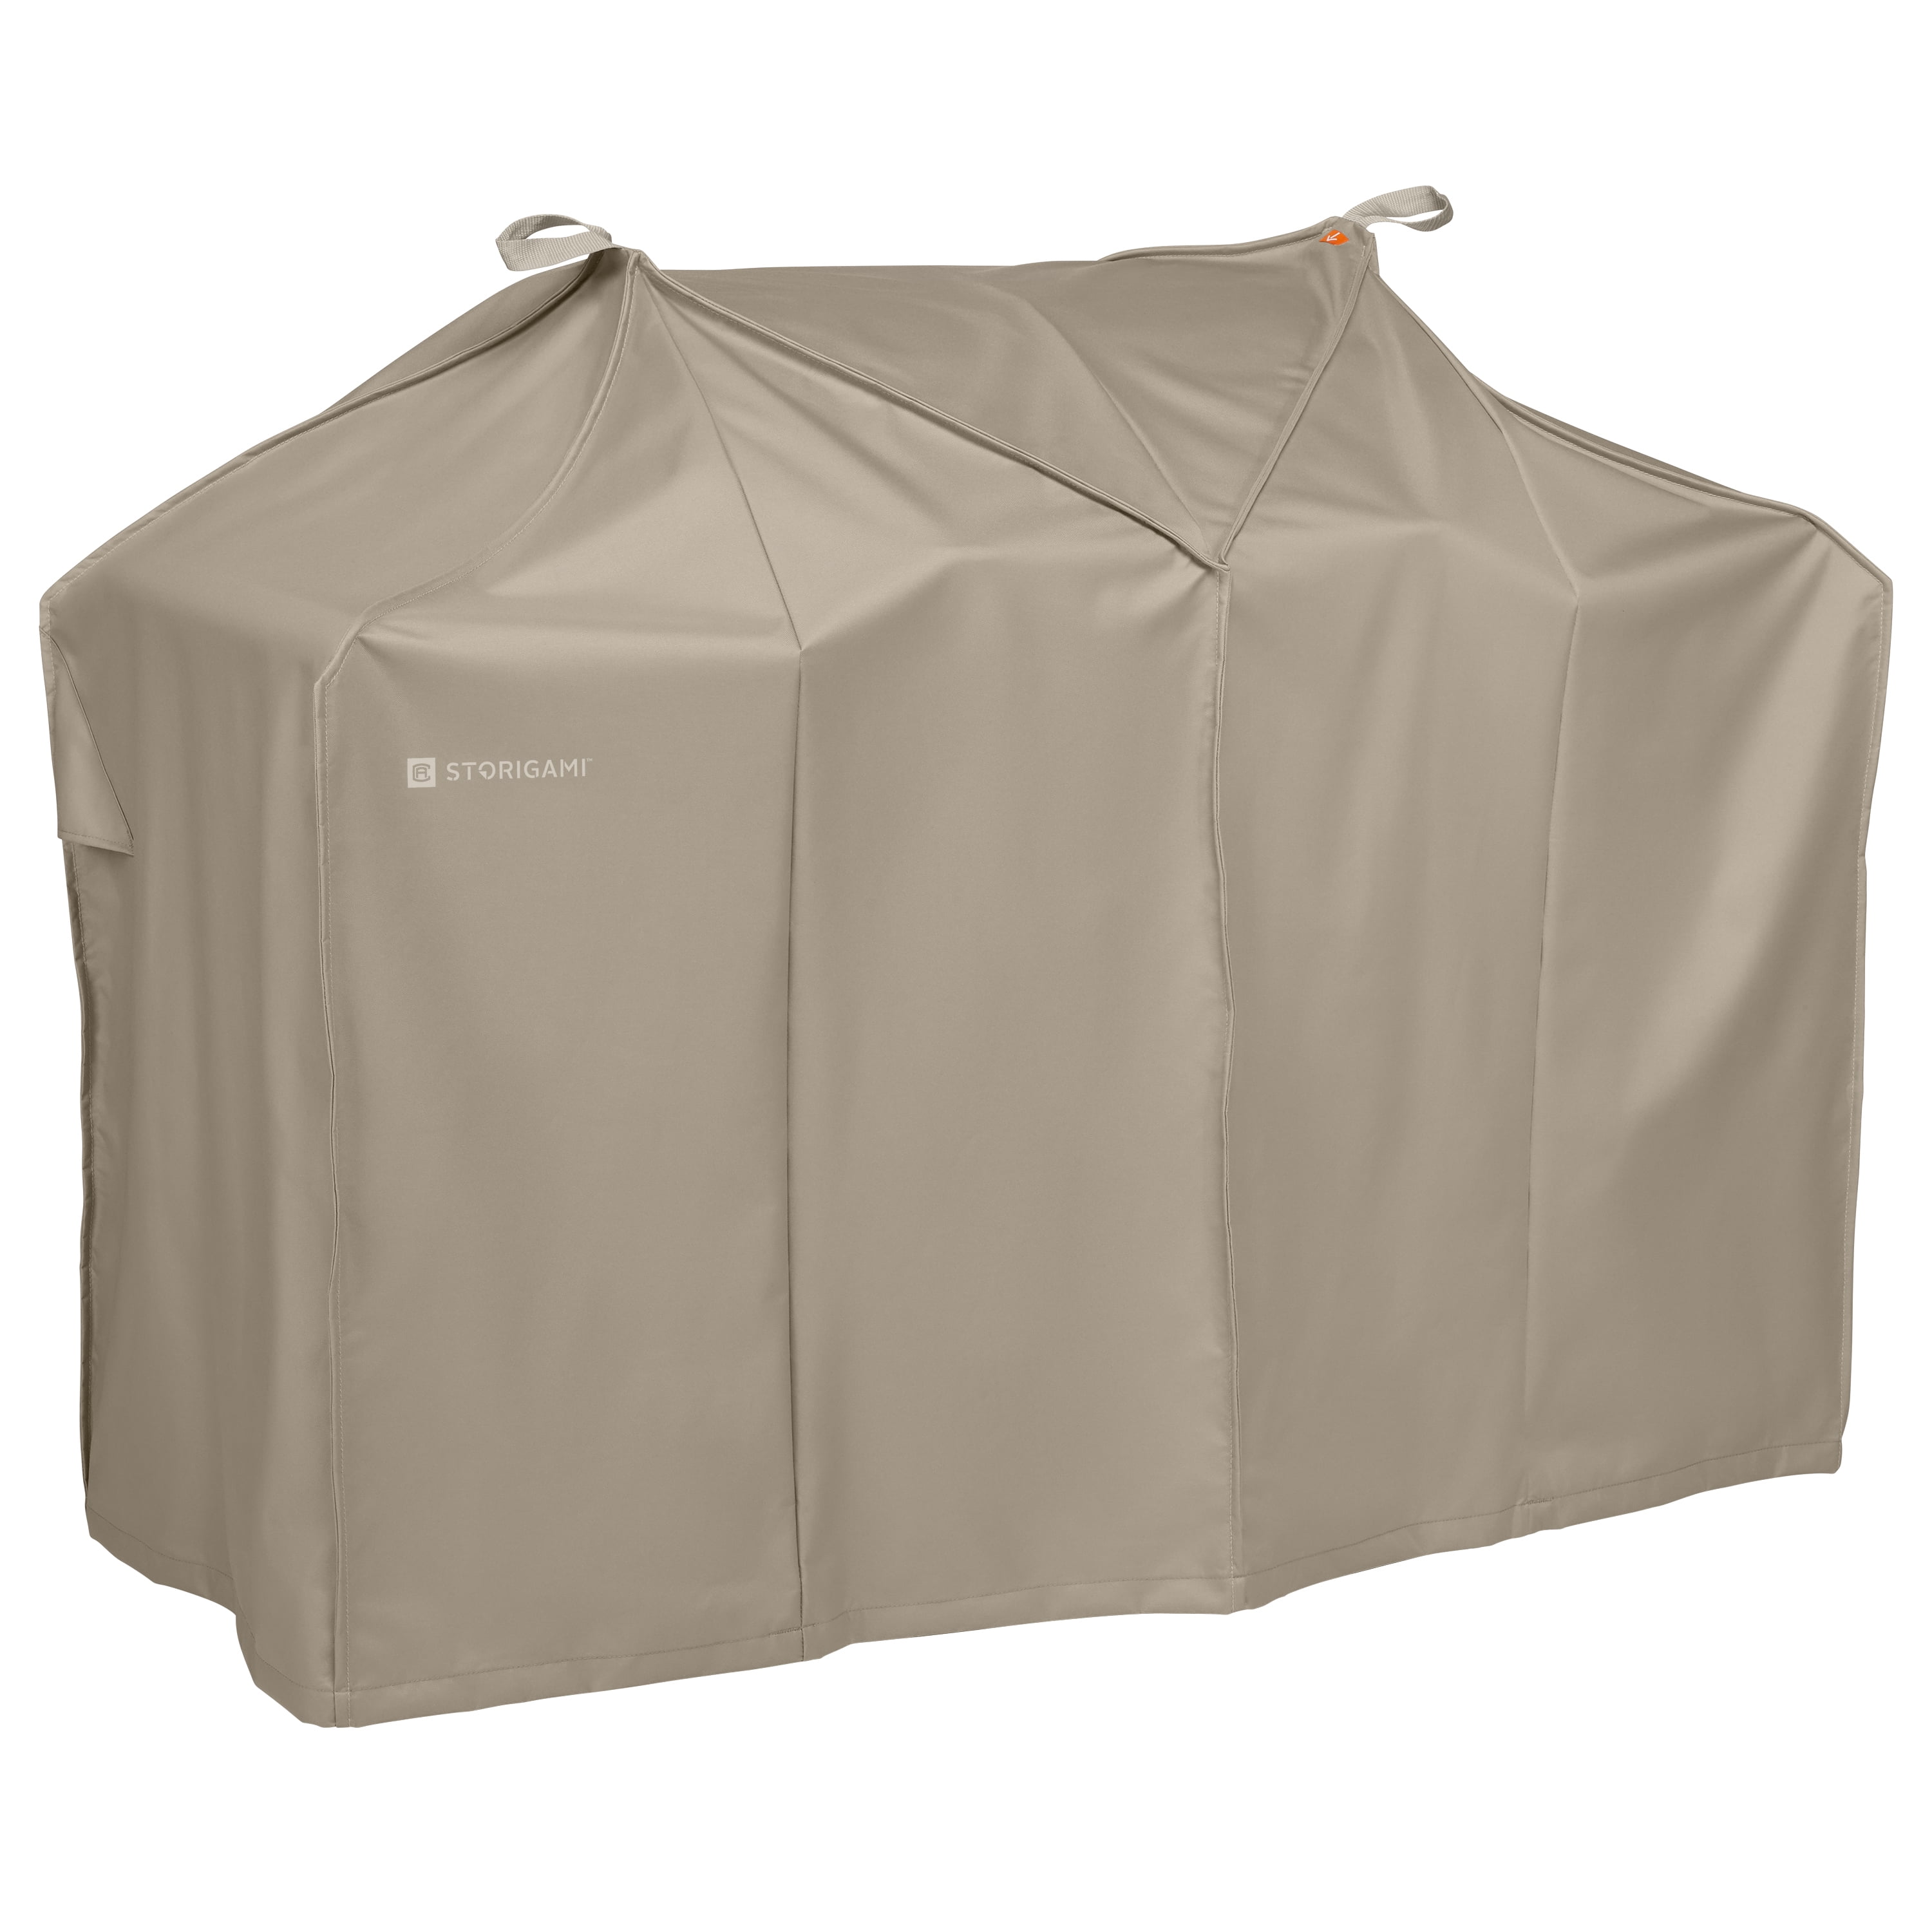 Grill Cover w/ Tent Style Fit Weather Dust Corrosion Protection Black 52 in 